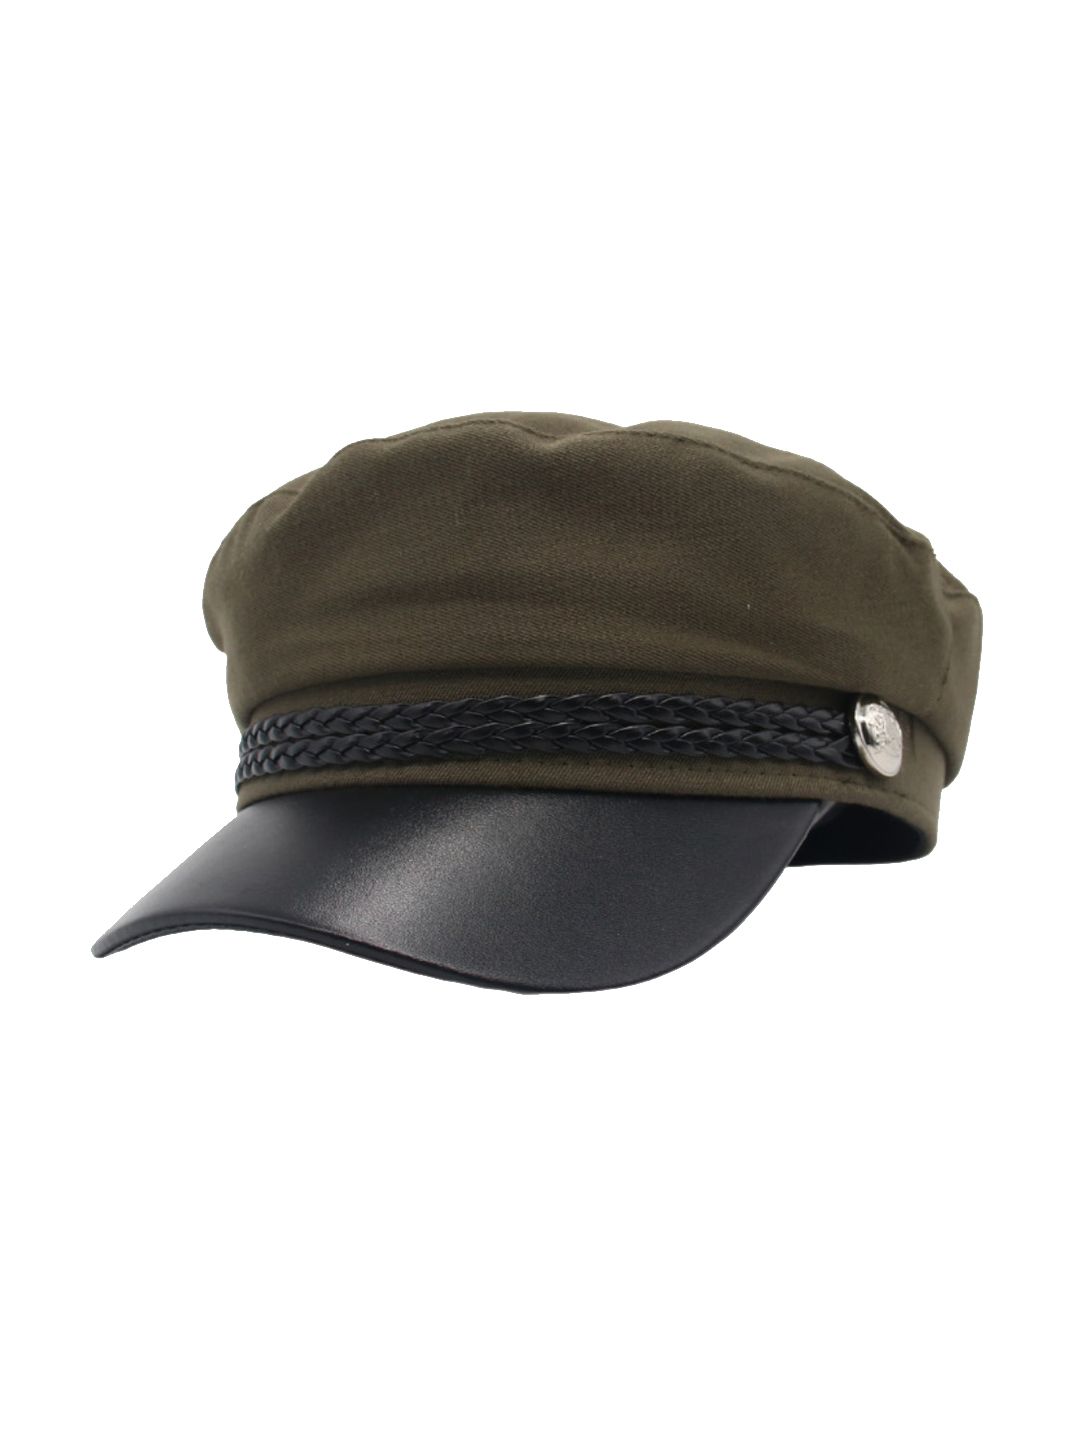 iSWEVEN Unisex Green Caps Price in India